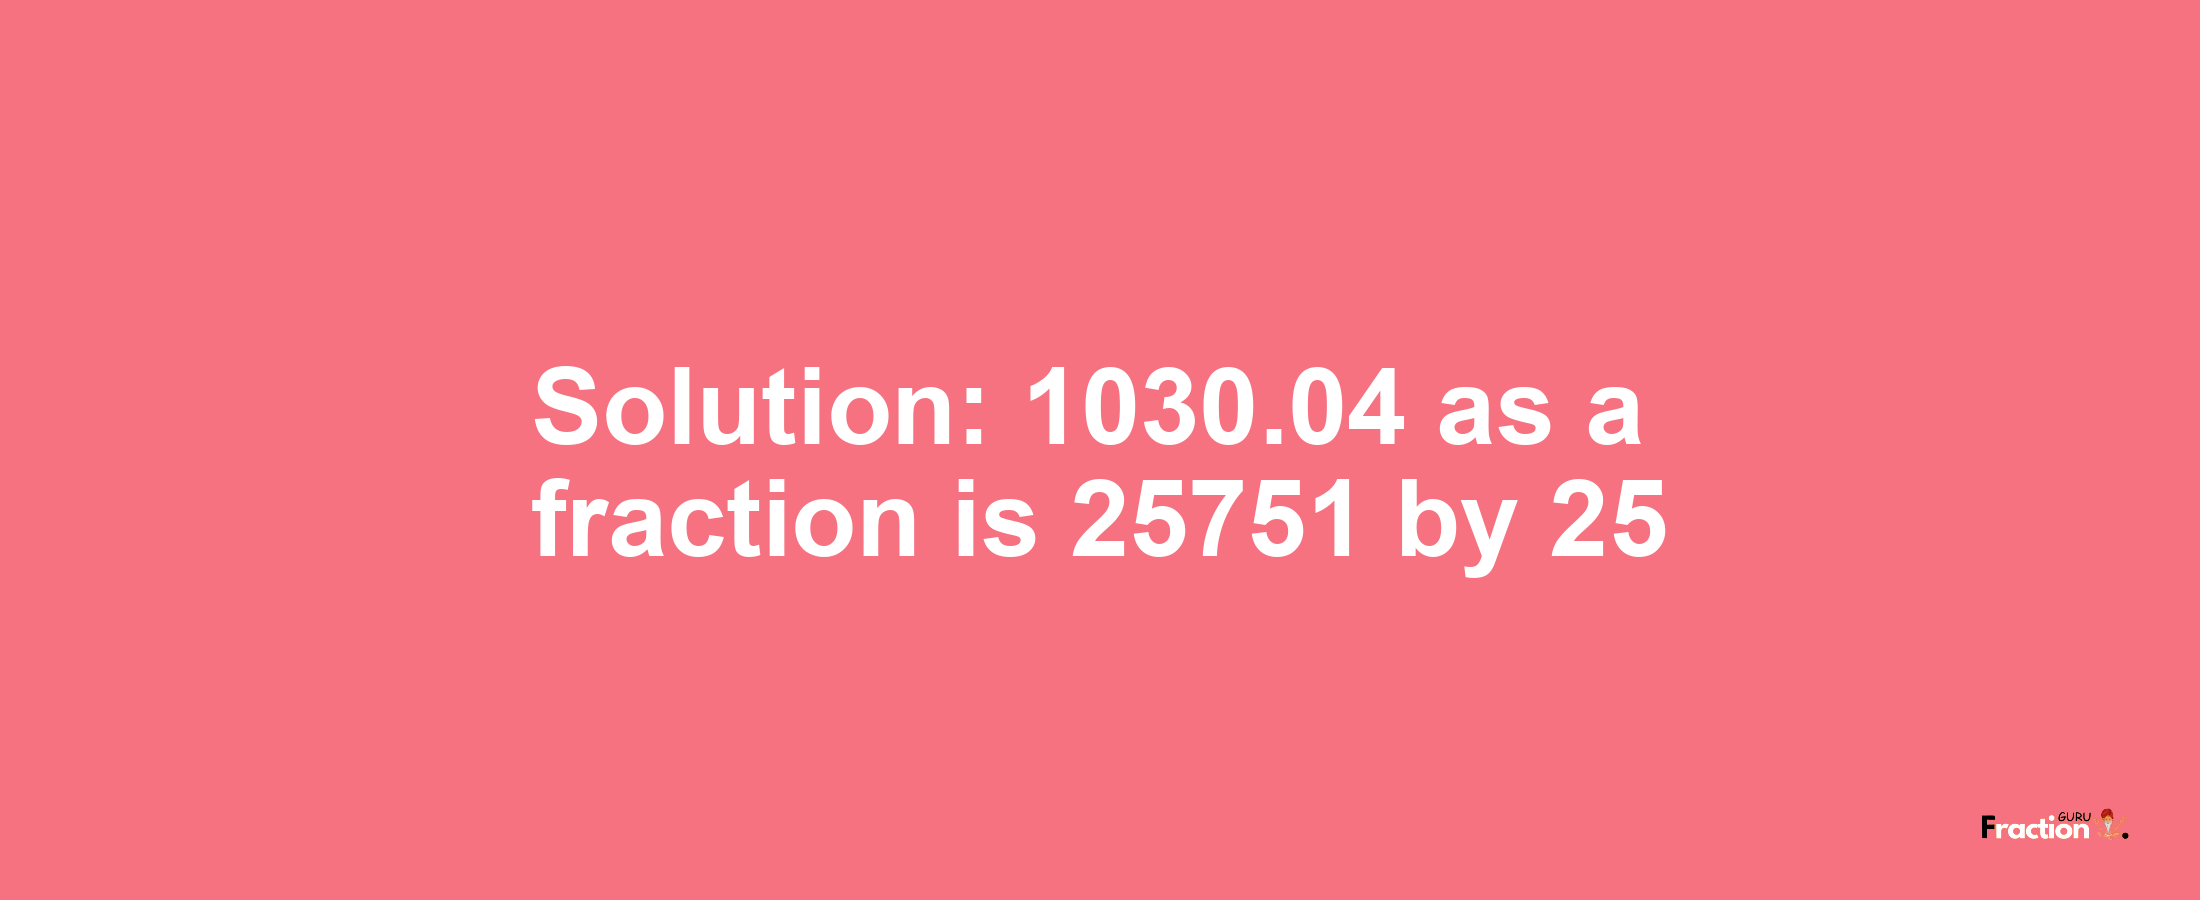 Solution:1030.04 as a fraction is 25751/25